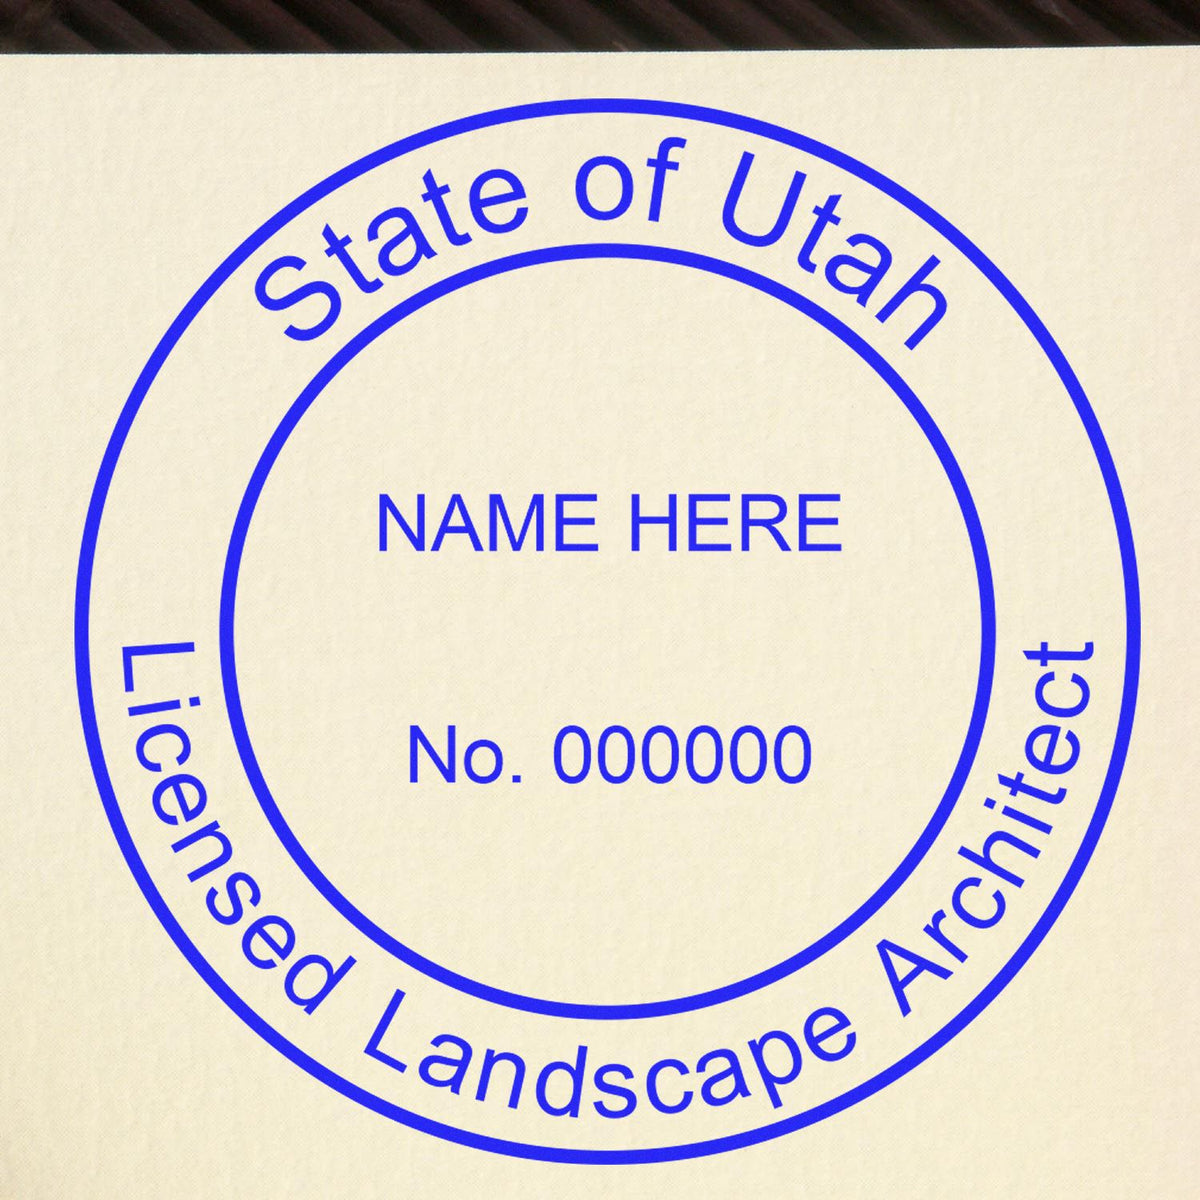 Another Example of a stamped impression of the Slim Pre-Inked Utah Landscape Architect Seal Stamp on a piece of office paper.